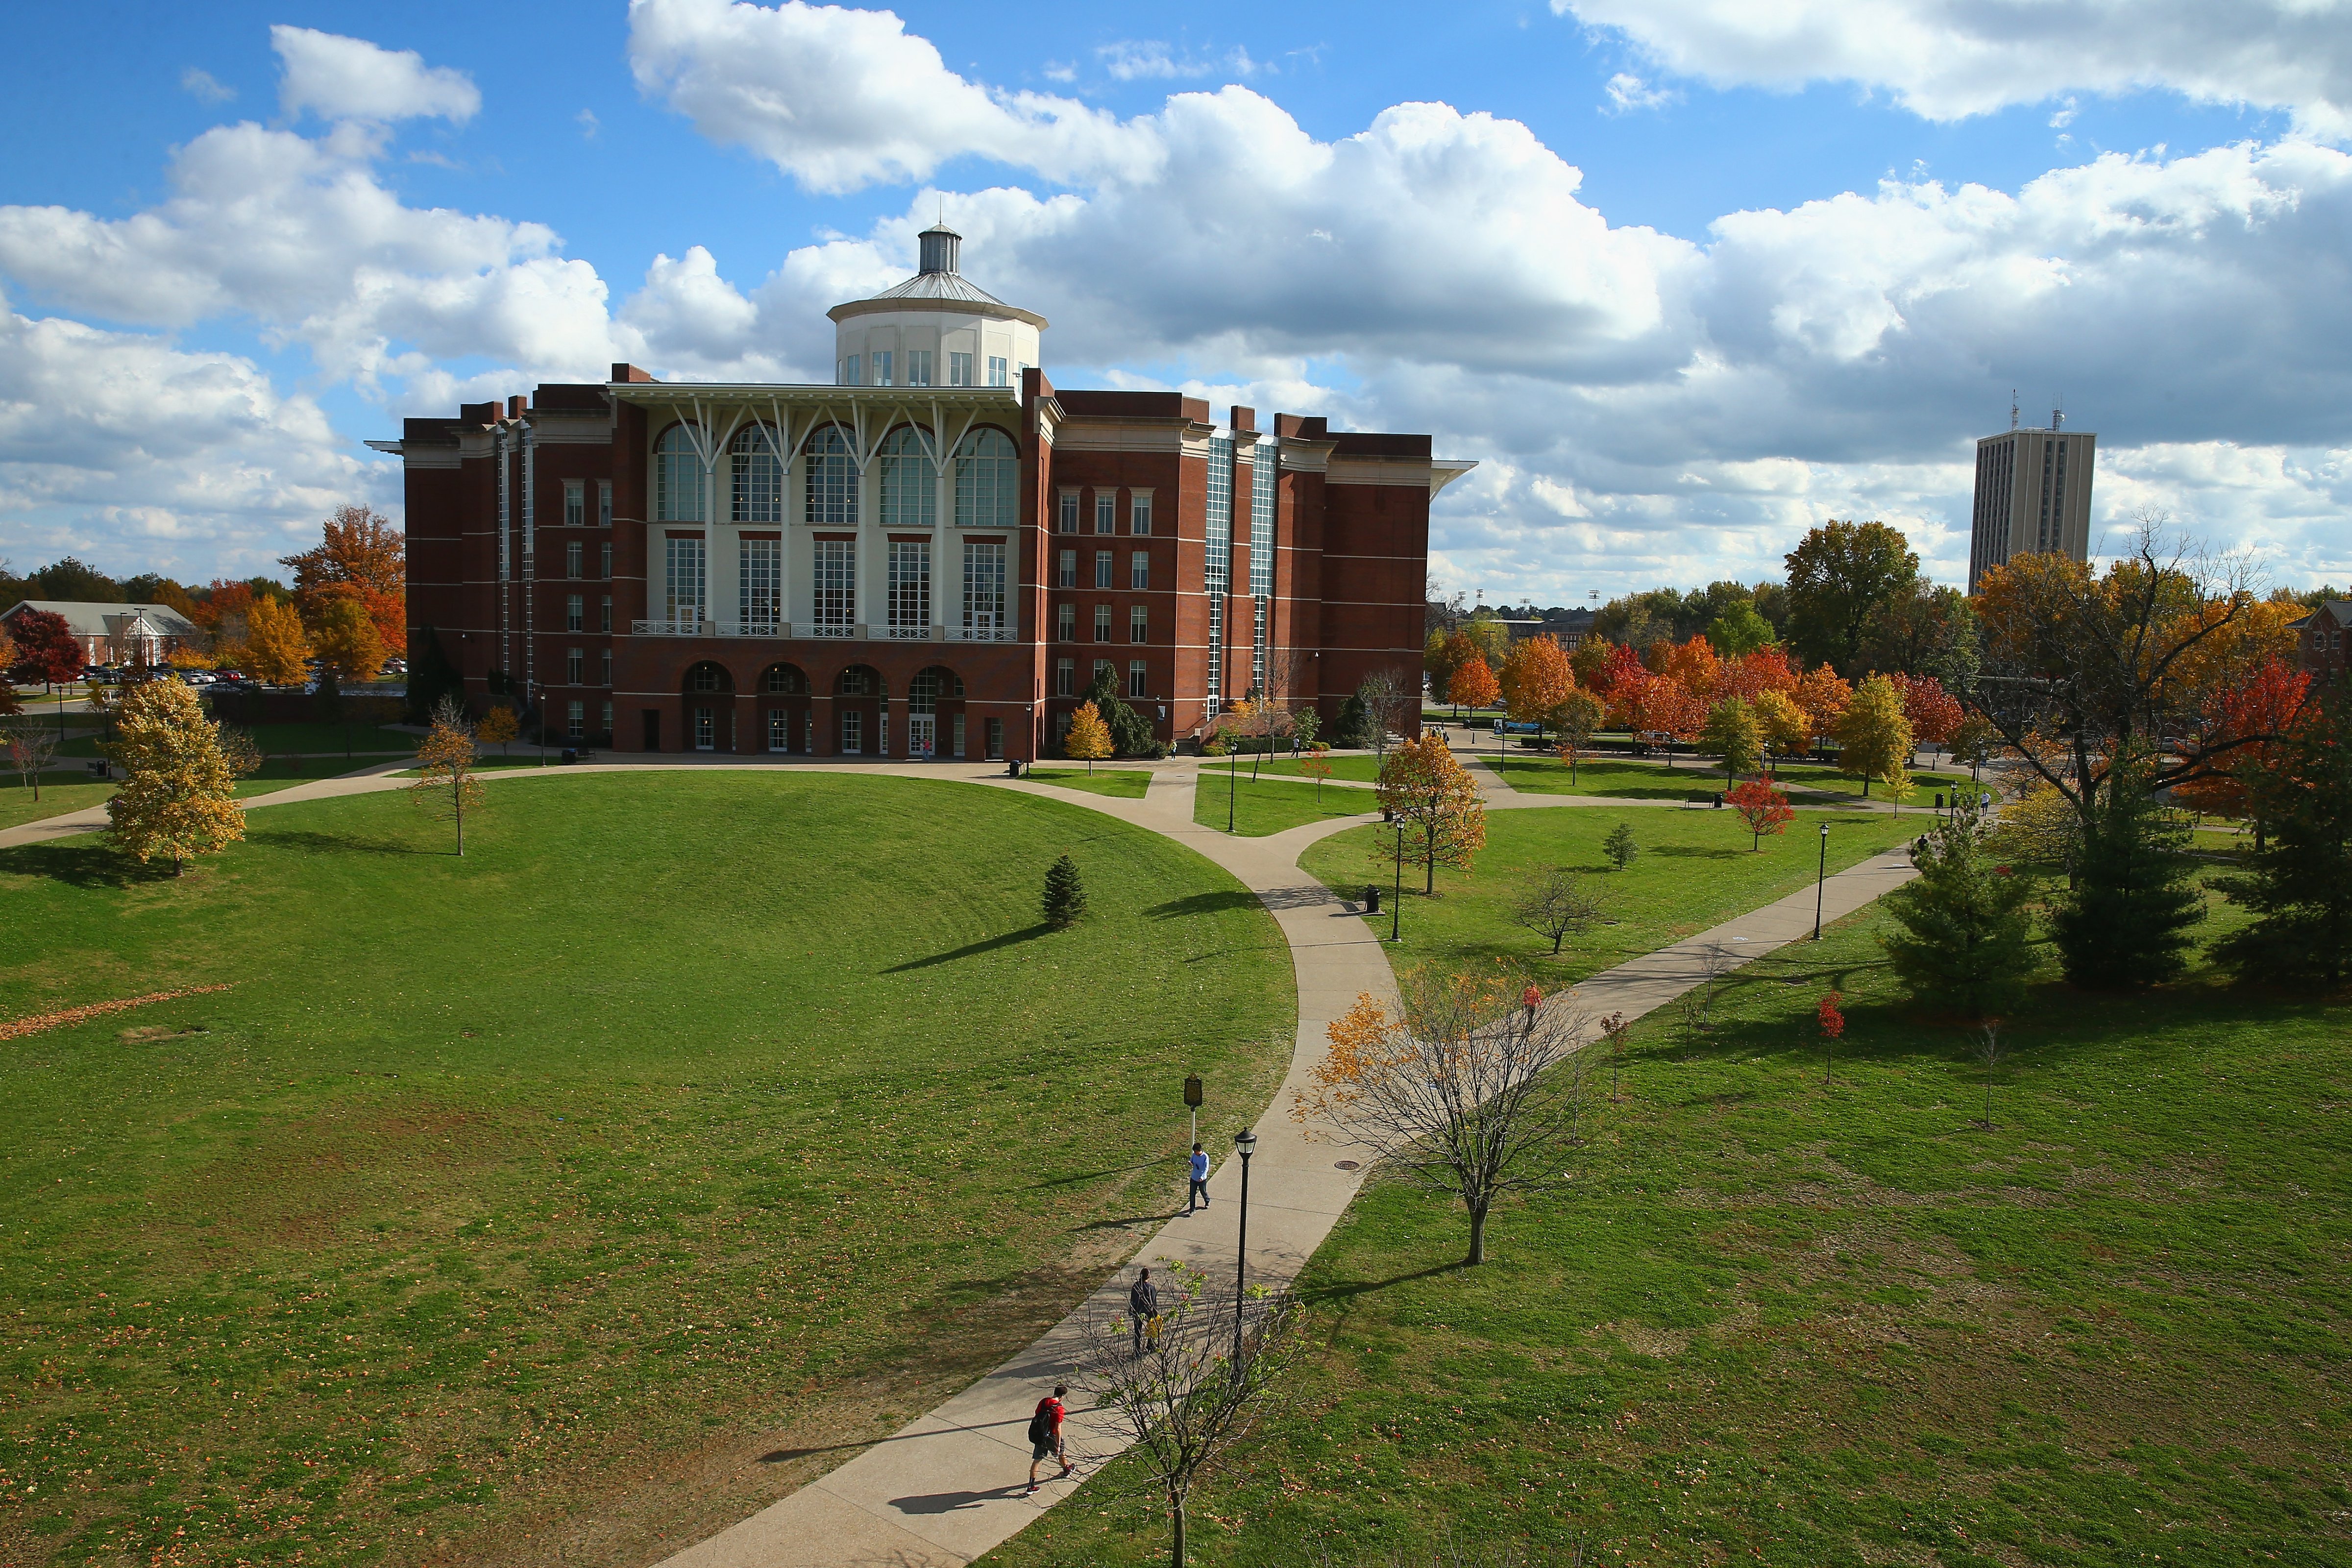 The William T. Young Library on the campus of the University of Kentucky, viewed on October 25, 2013 in Lexington, Kentucky. (Andy Lyons&mdash;Getty Images)